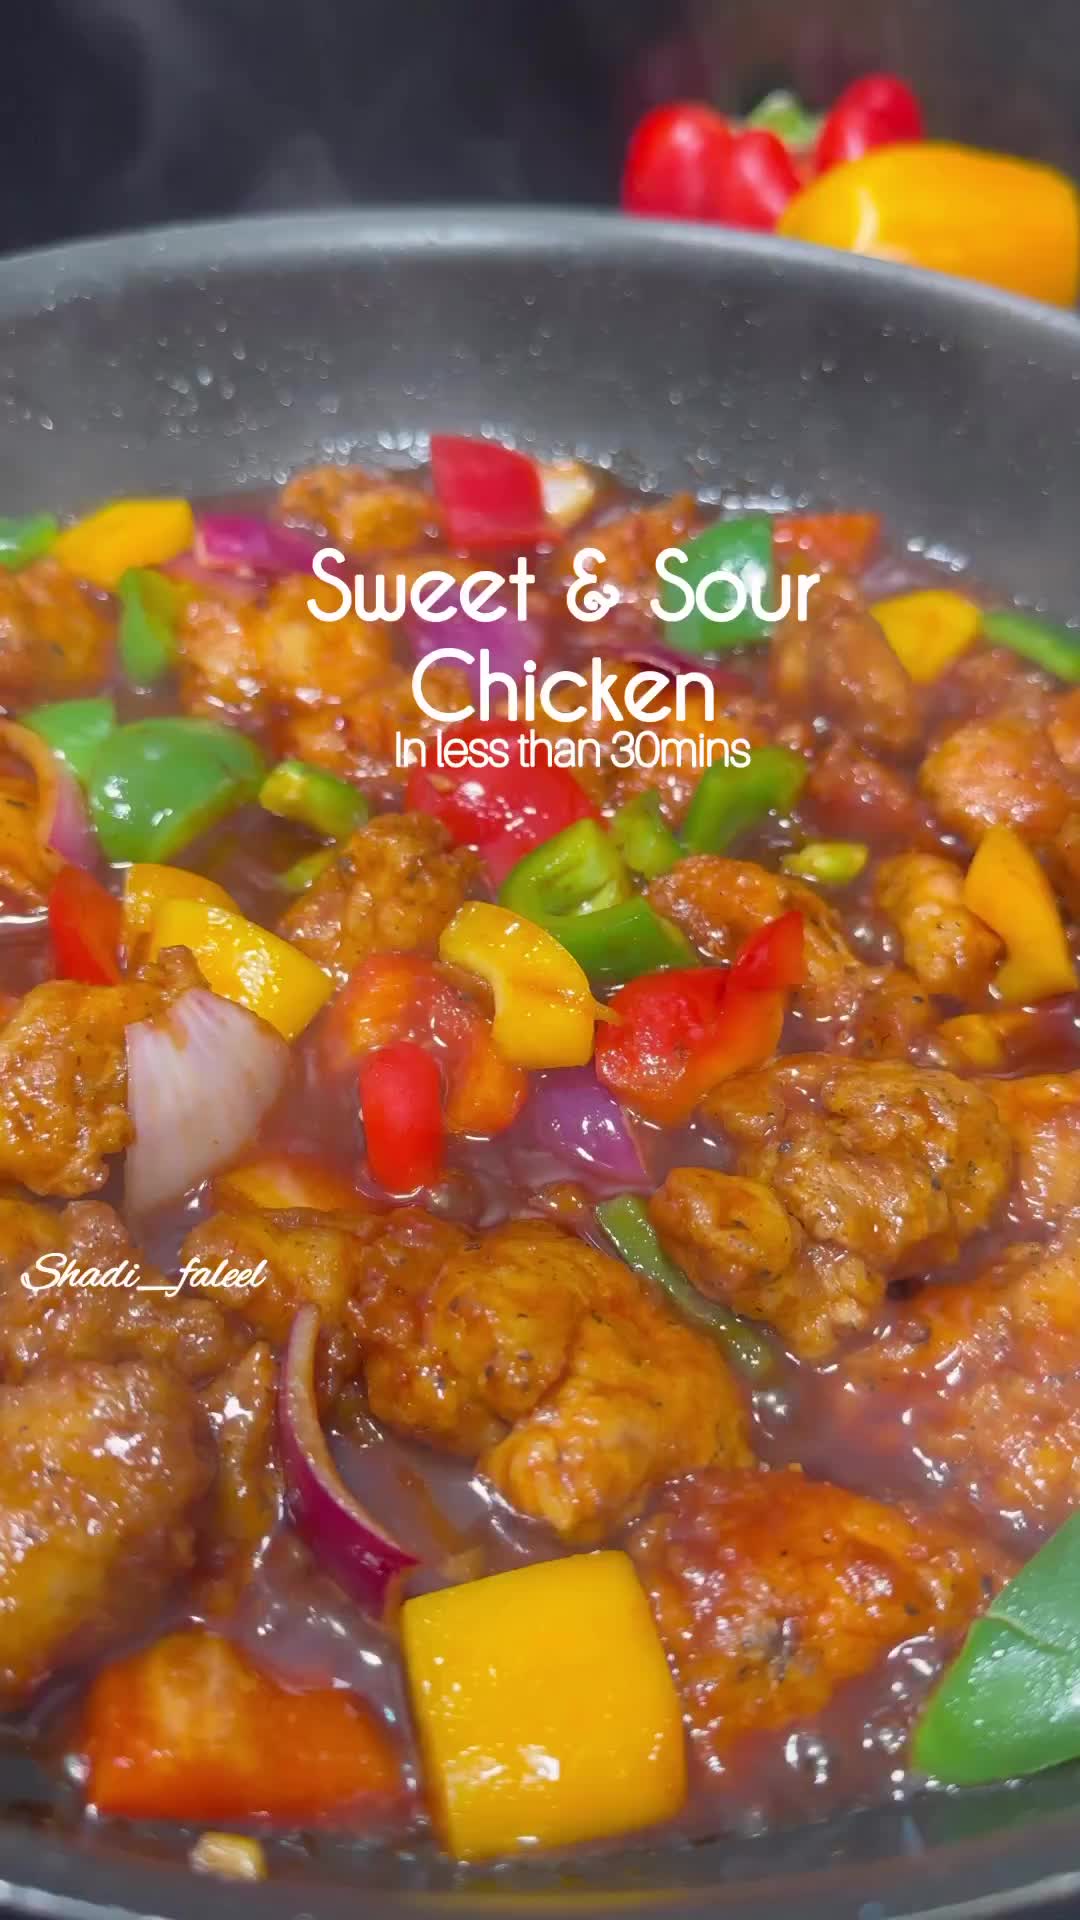 Quick and Easy Chinese Sweet & Sour Chicken: Perfect Meal Prep for Busy Days! #mealprep #mealpre